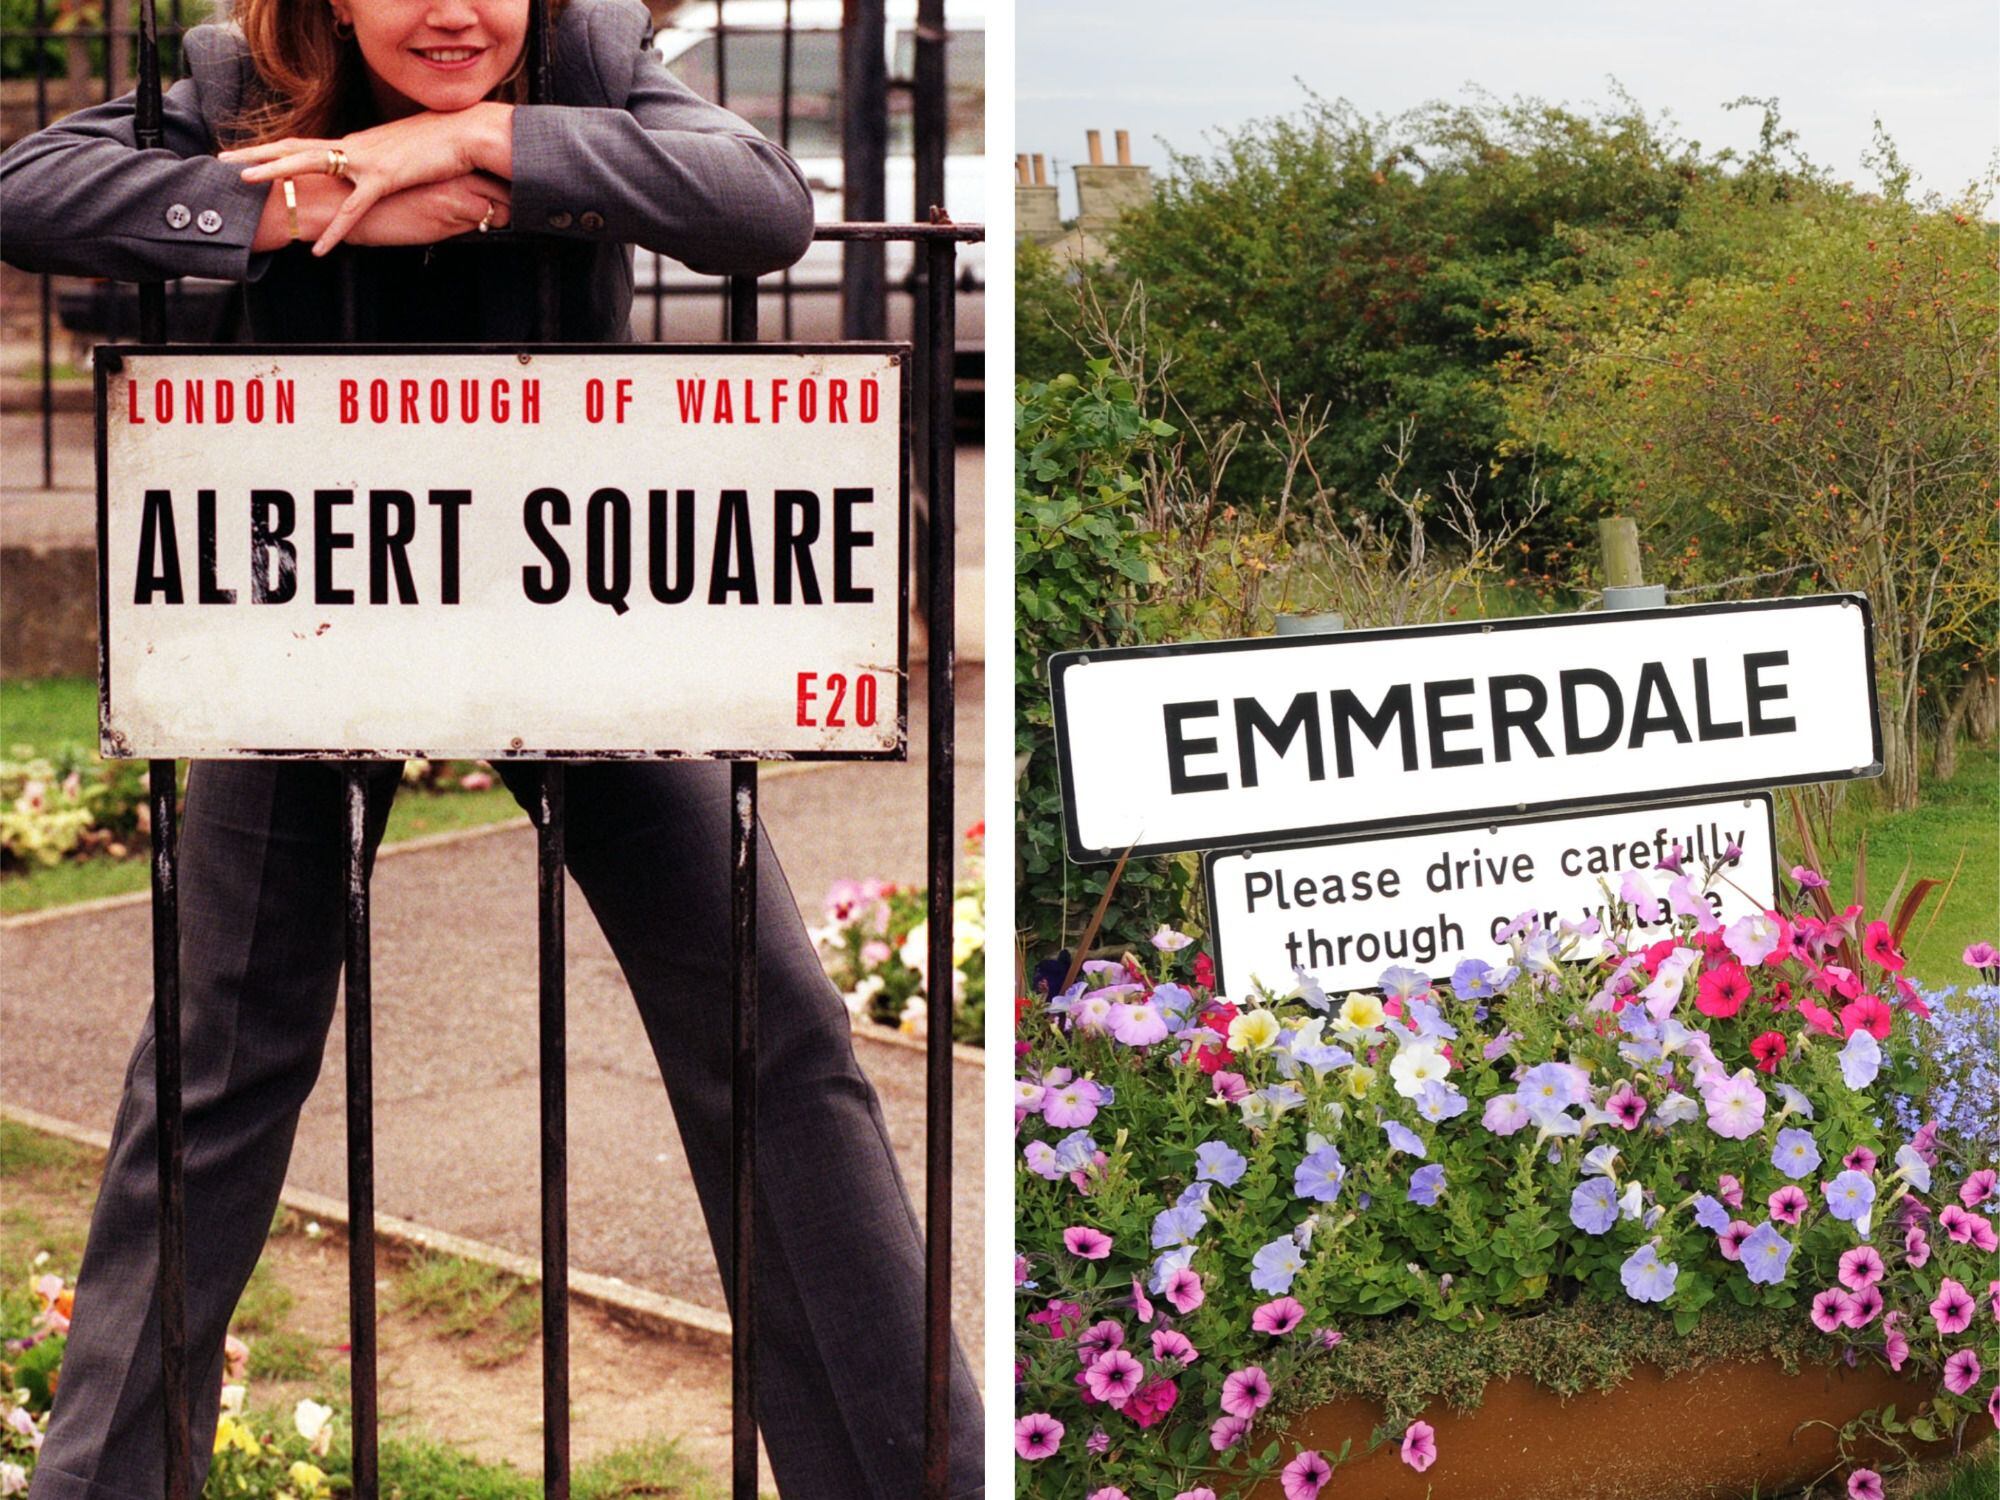 BBC’s EastEnders and ITV’s Emmerdale go head to head in evening viewing slot